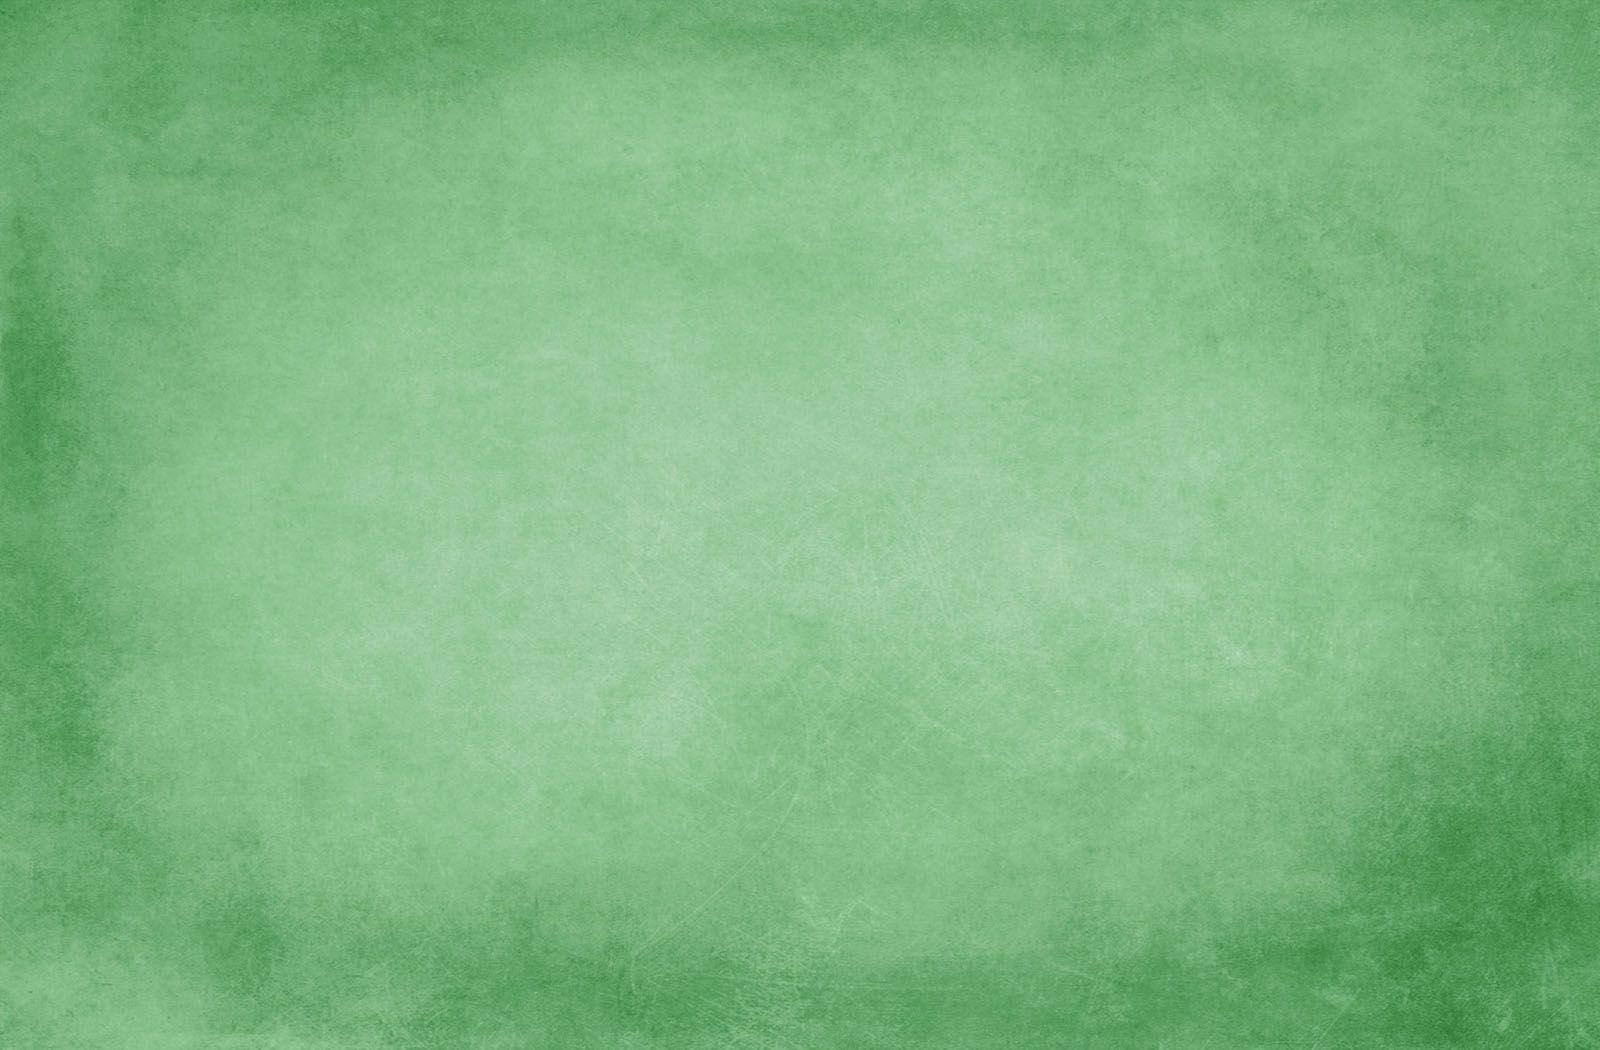 Solid Light Green Texture 308518 Image HD Wallpapers